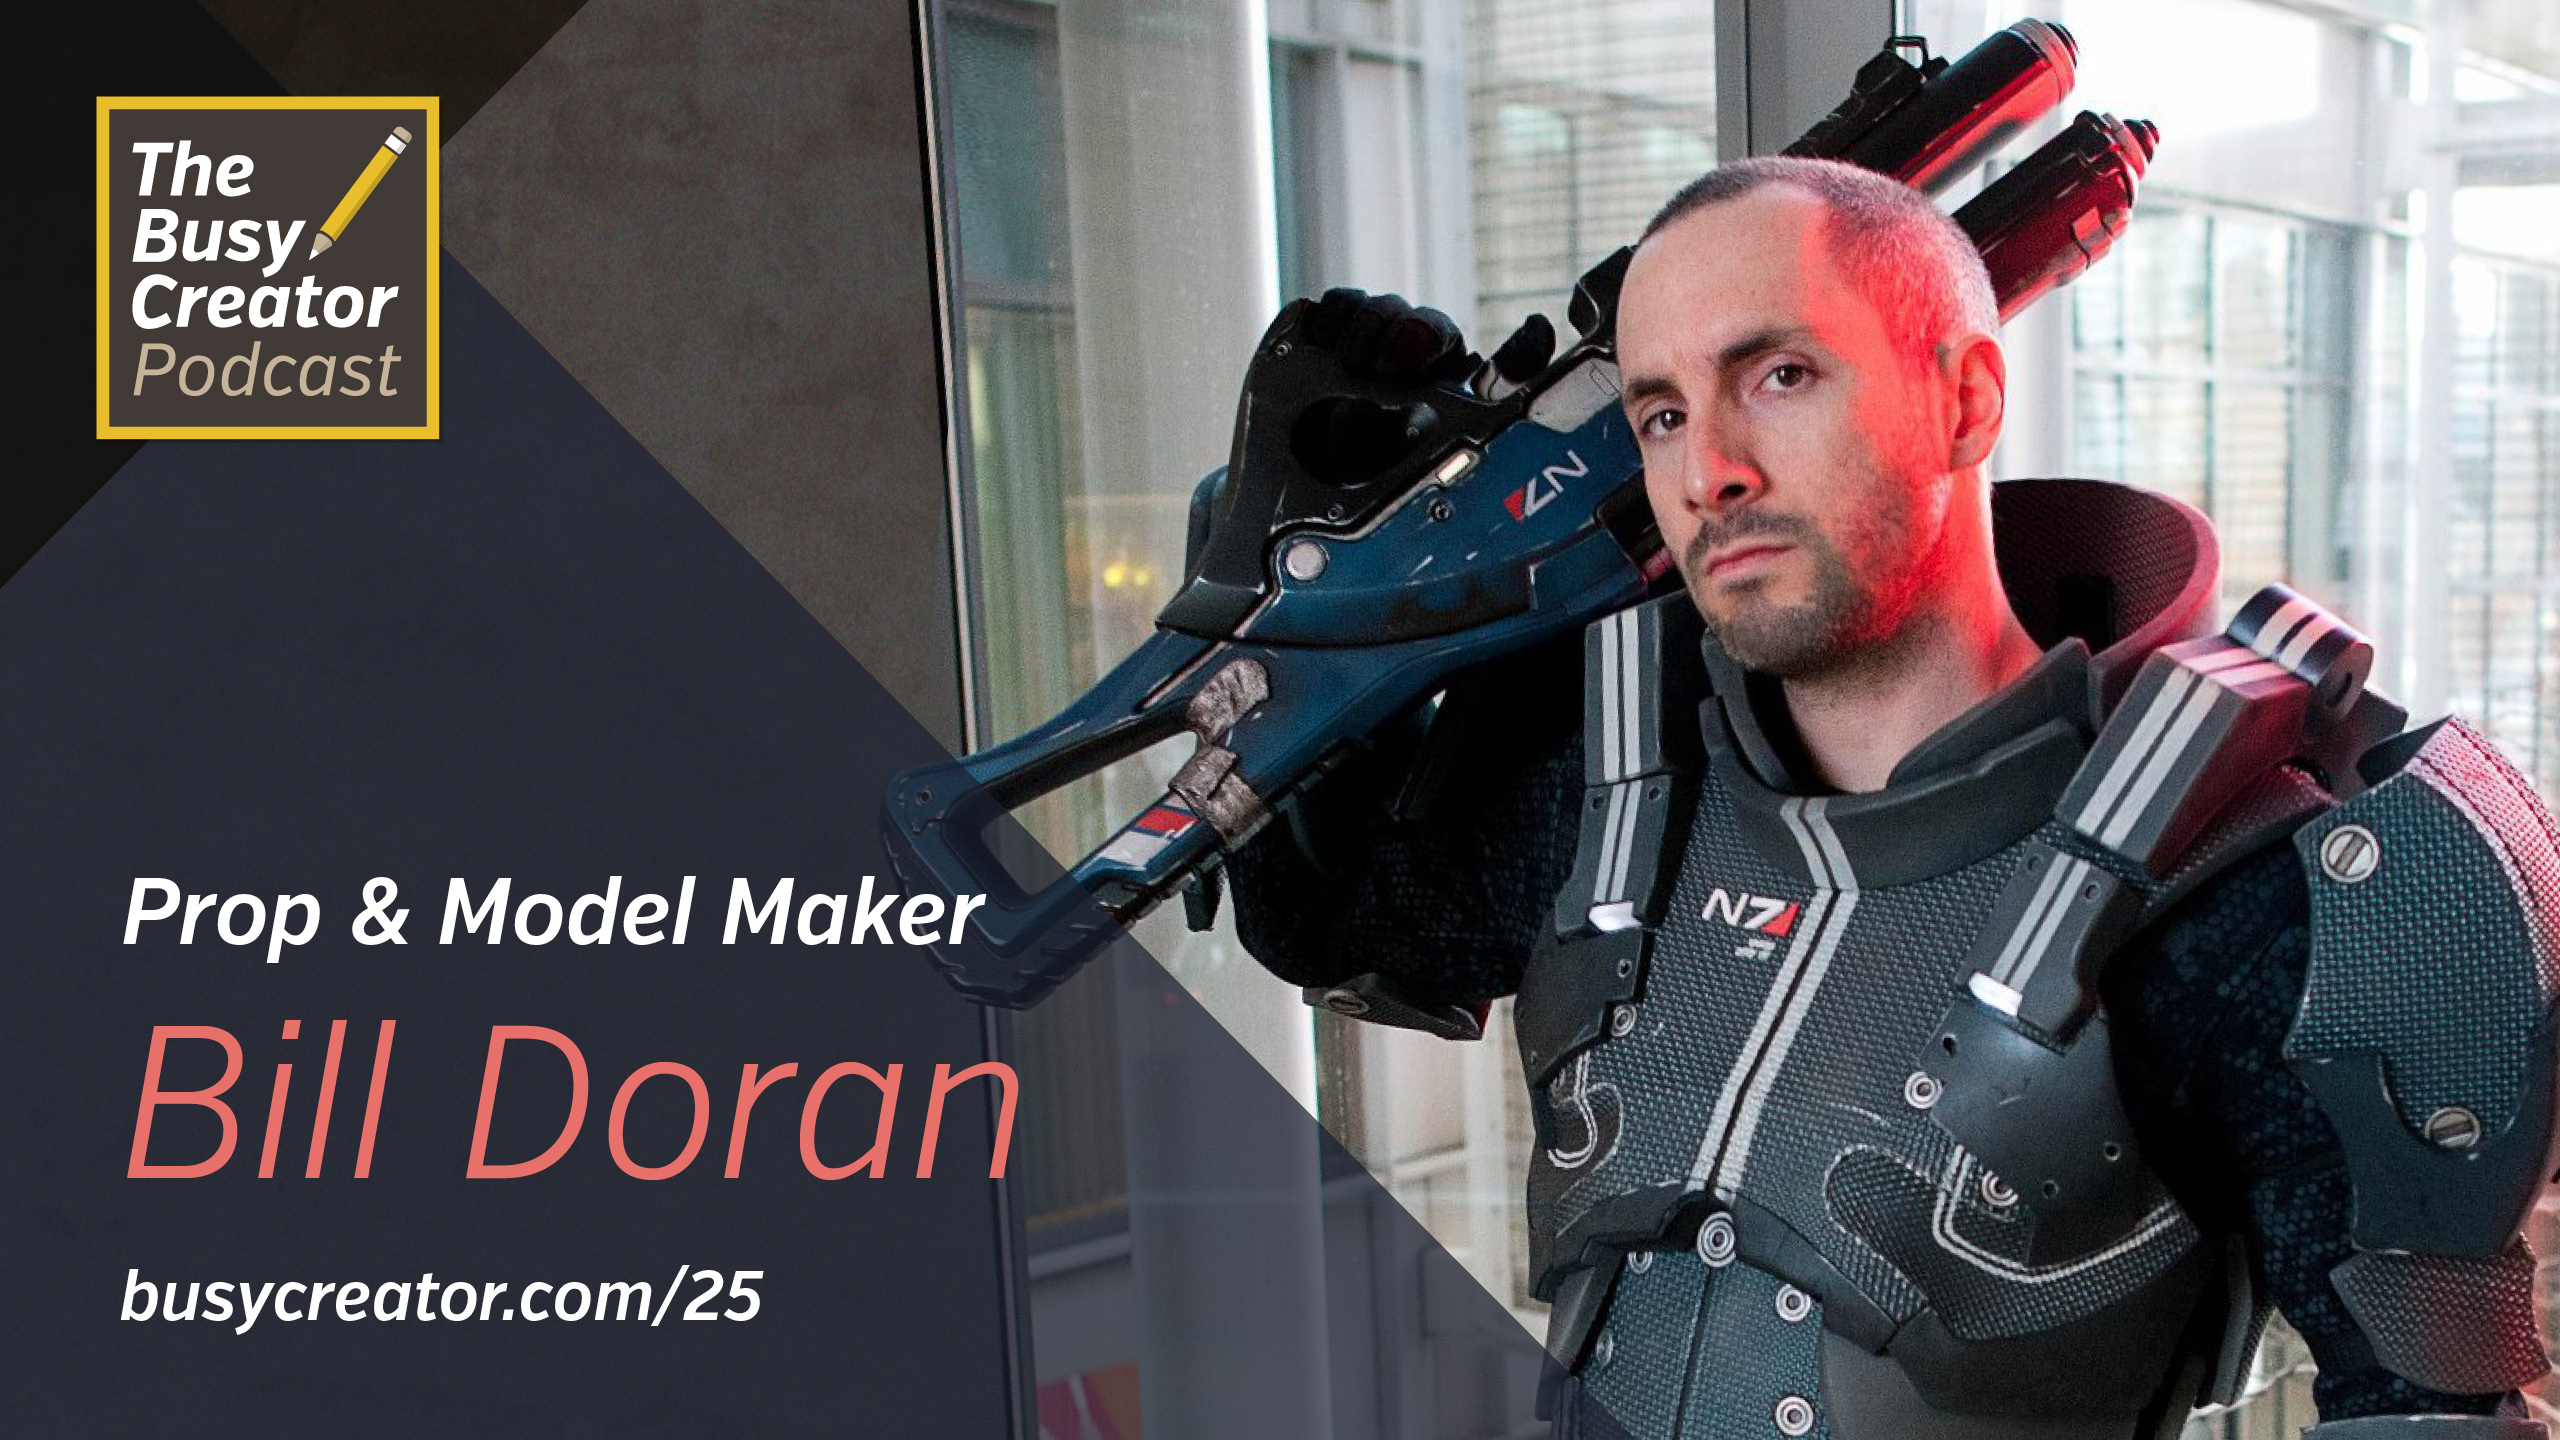 Turning Your Garage Into an Intergalactic Weapons Factory, with Prop & Model Maker Bill Doran